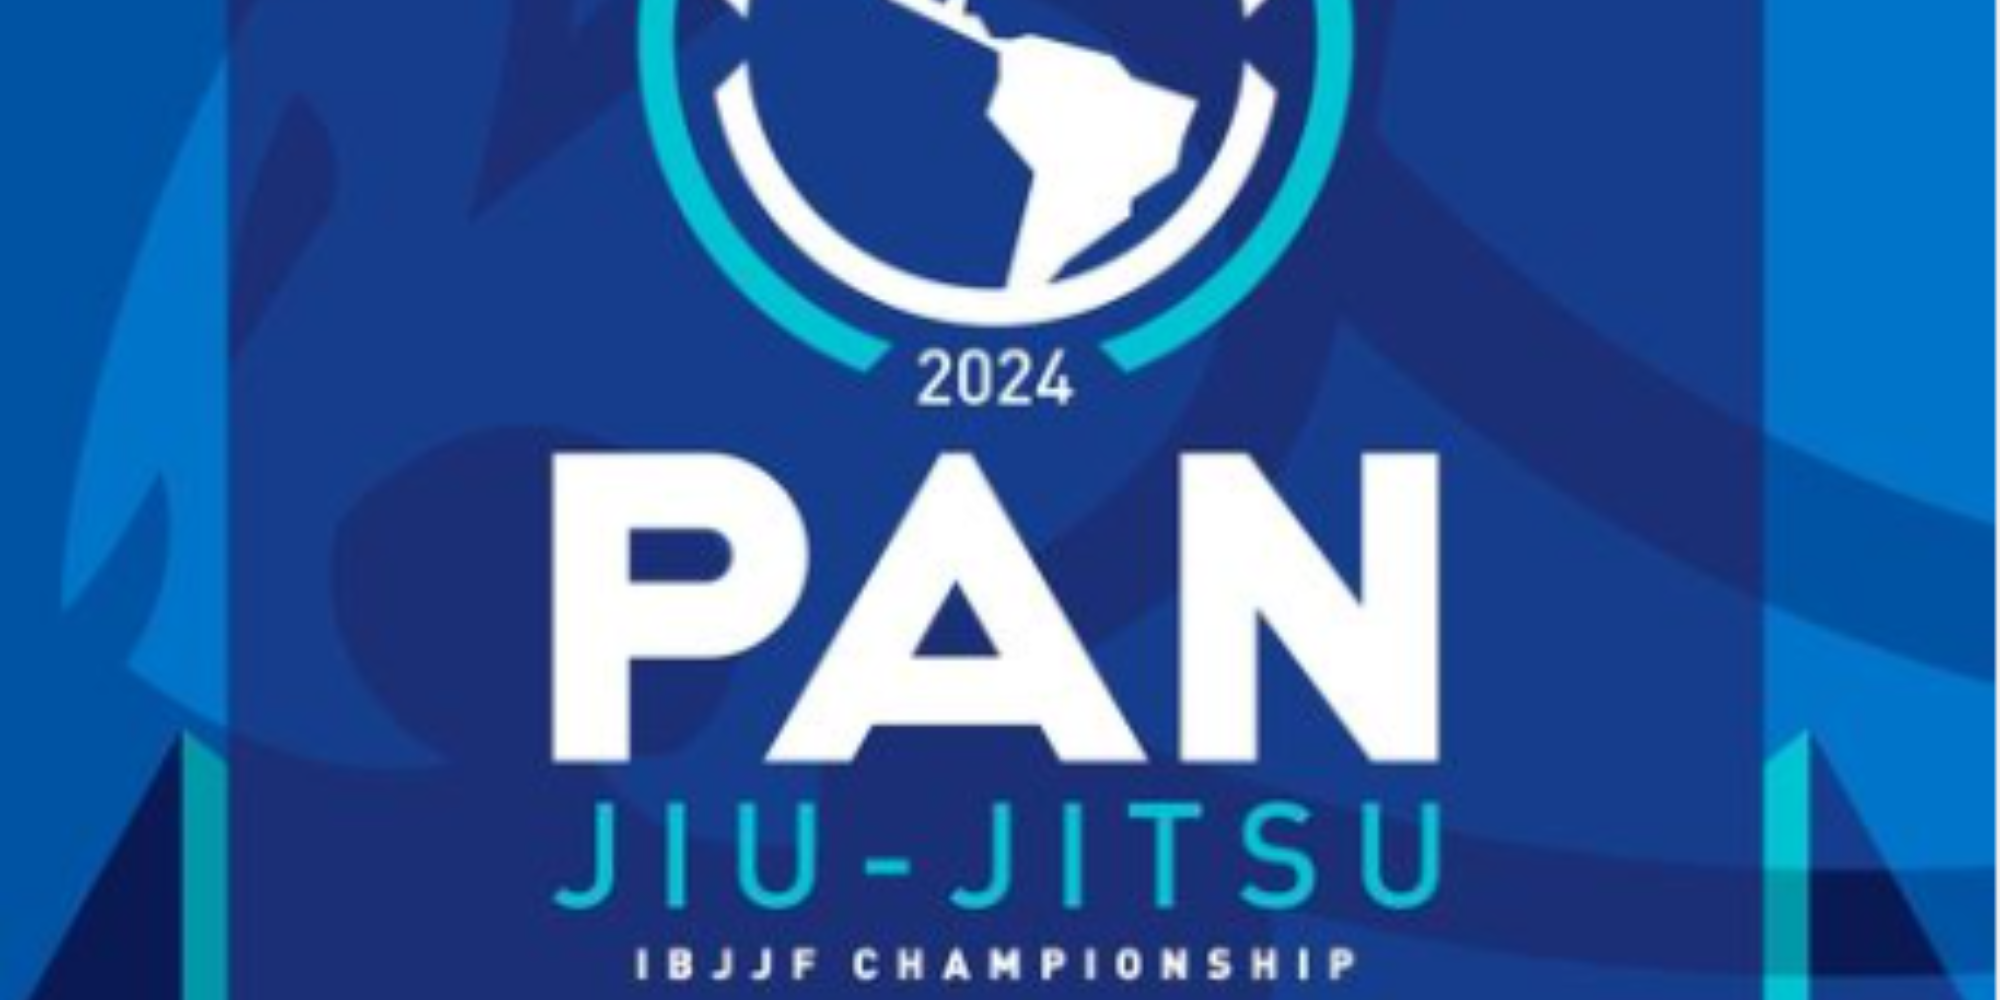 Dates And Location Announced For IBJJF Pan Championship 2024